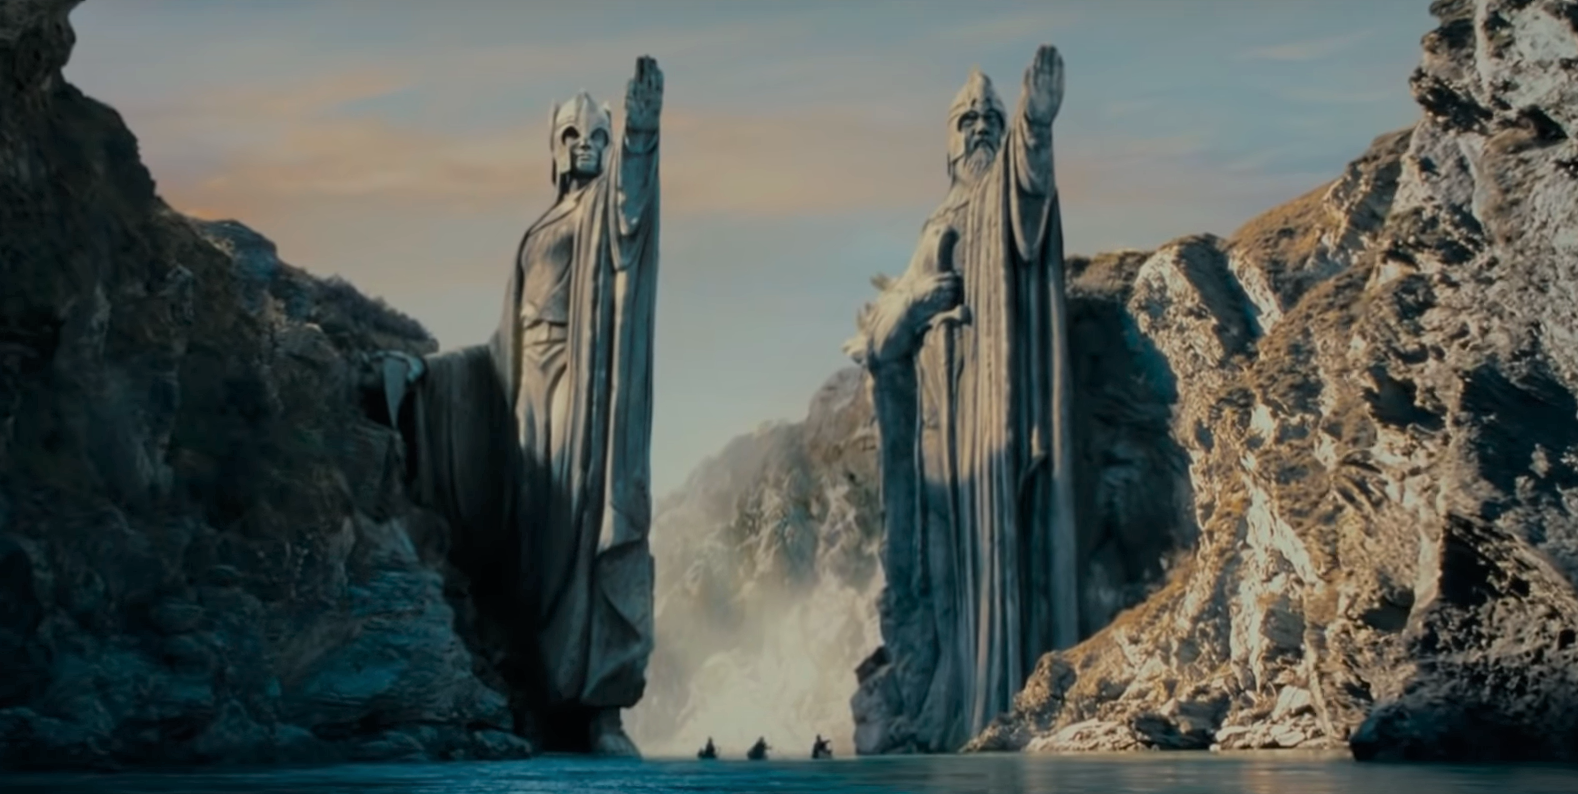 Amazon's Lord of the Rings show leaves New Zealand for Britain in Season 2